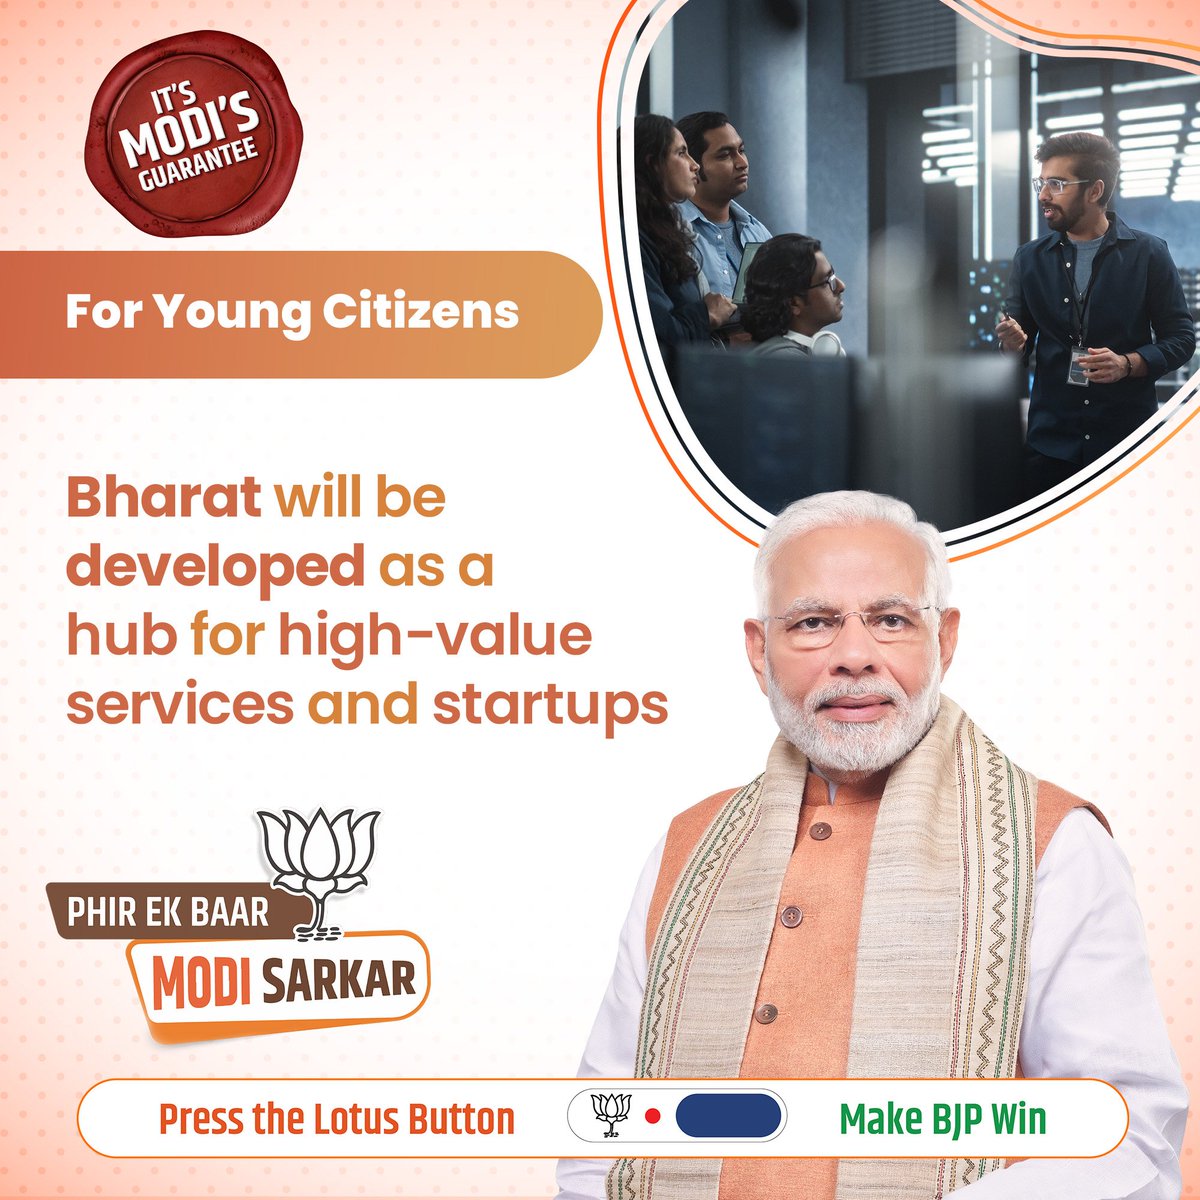 A roadmap to make India a hum for high-value services & startups, more robust support to entrepreneurs through higher availability of MUDRA loans & strengthening India's bid to host 2036 Olympics with robust sports infrastructure : these are Modi's guarantees for the youth. Your…